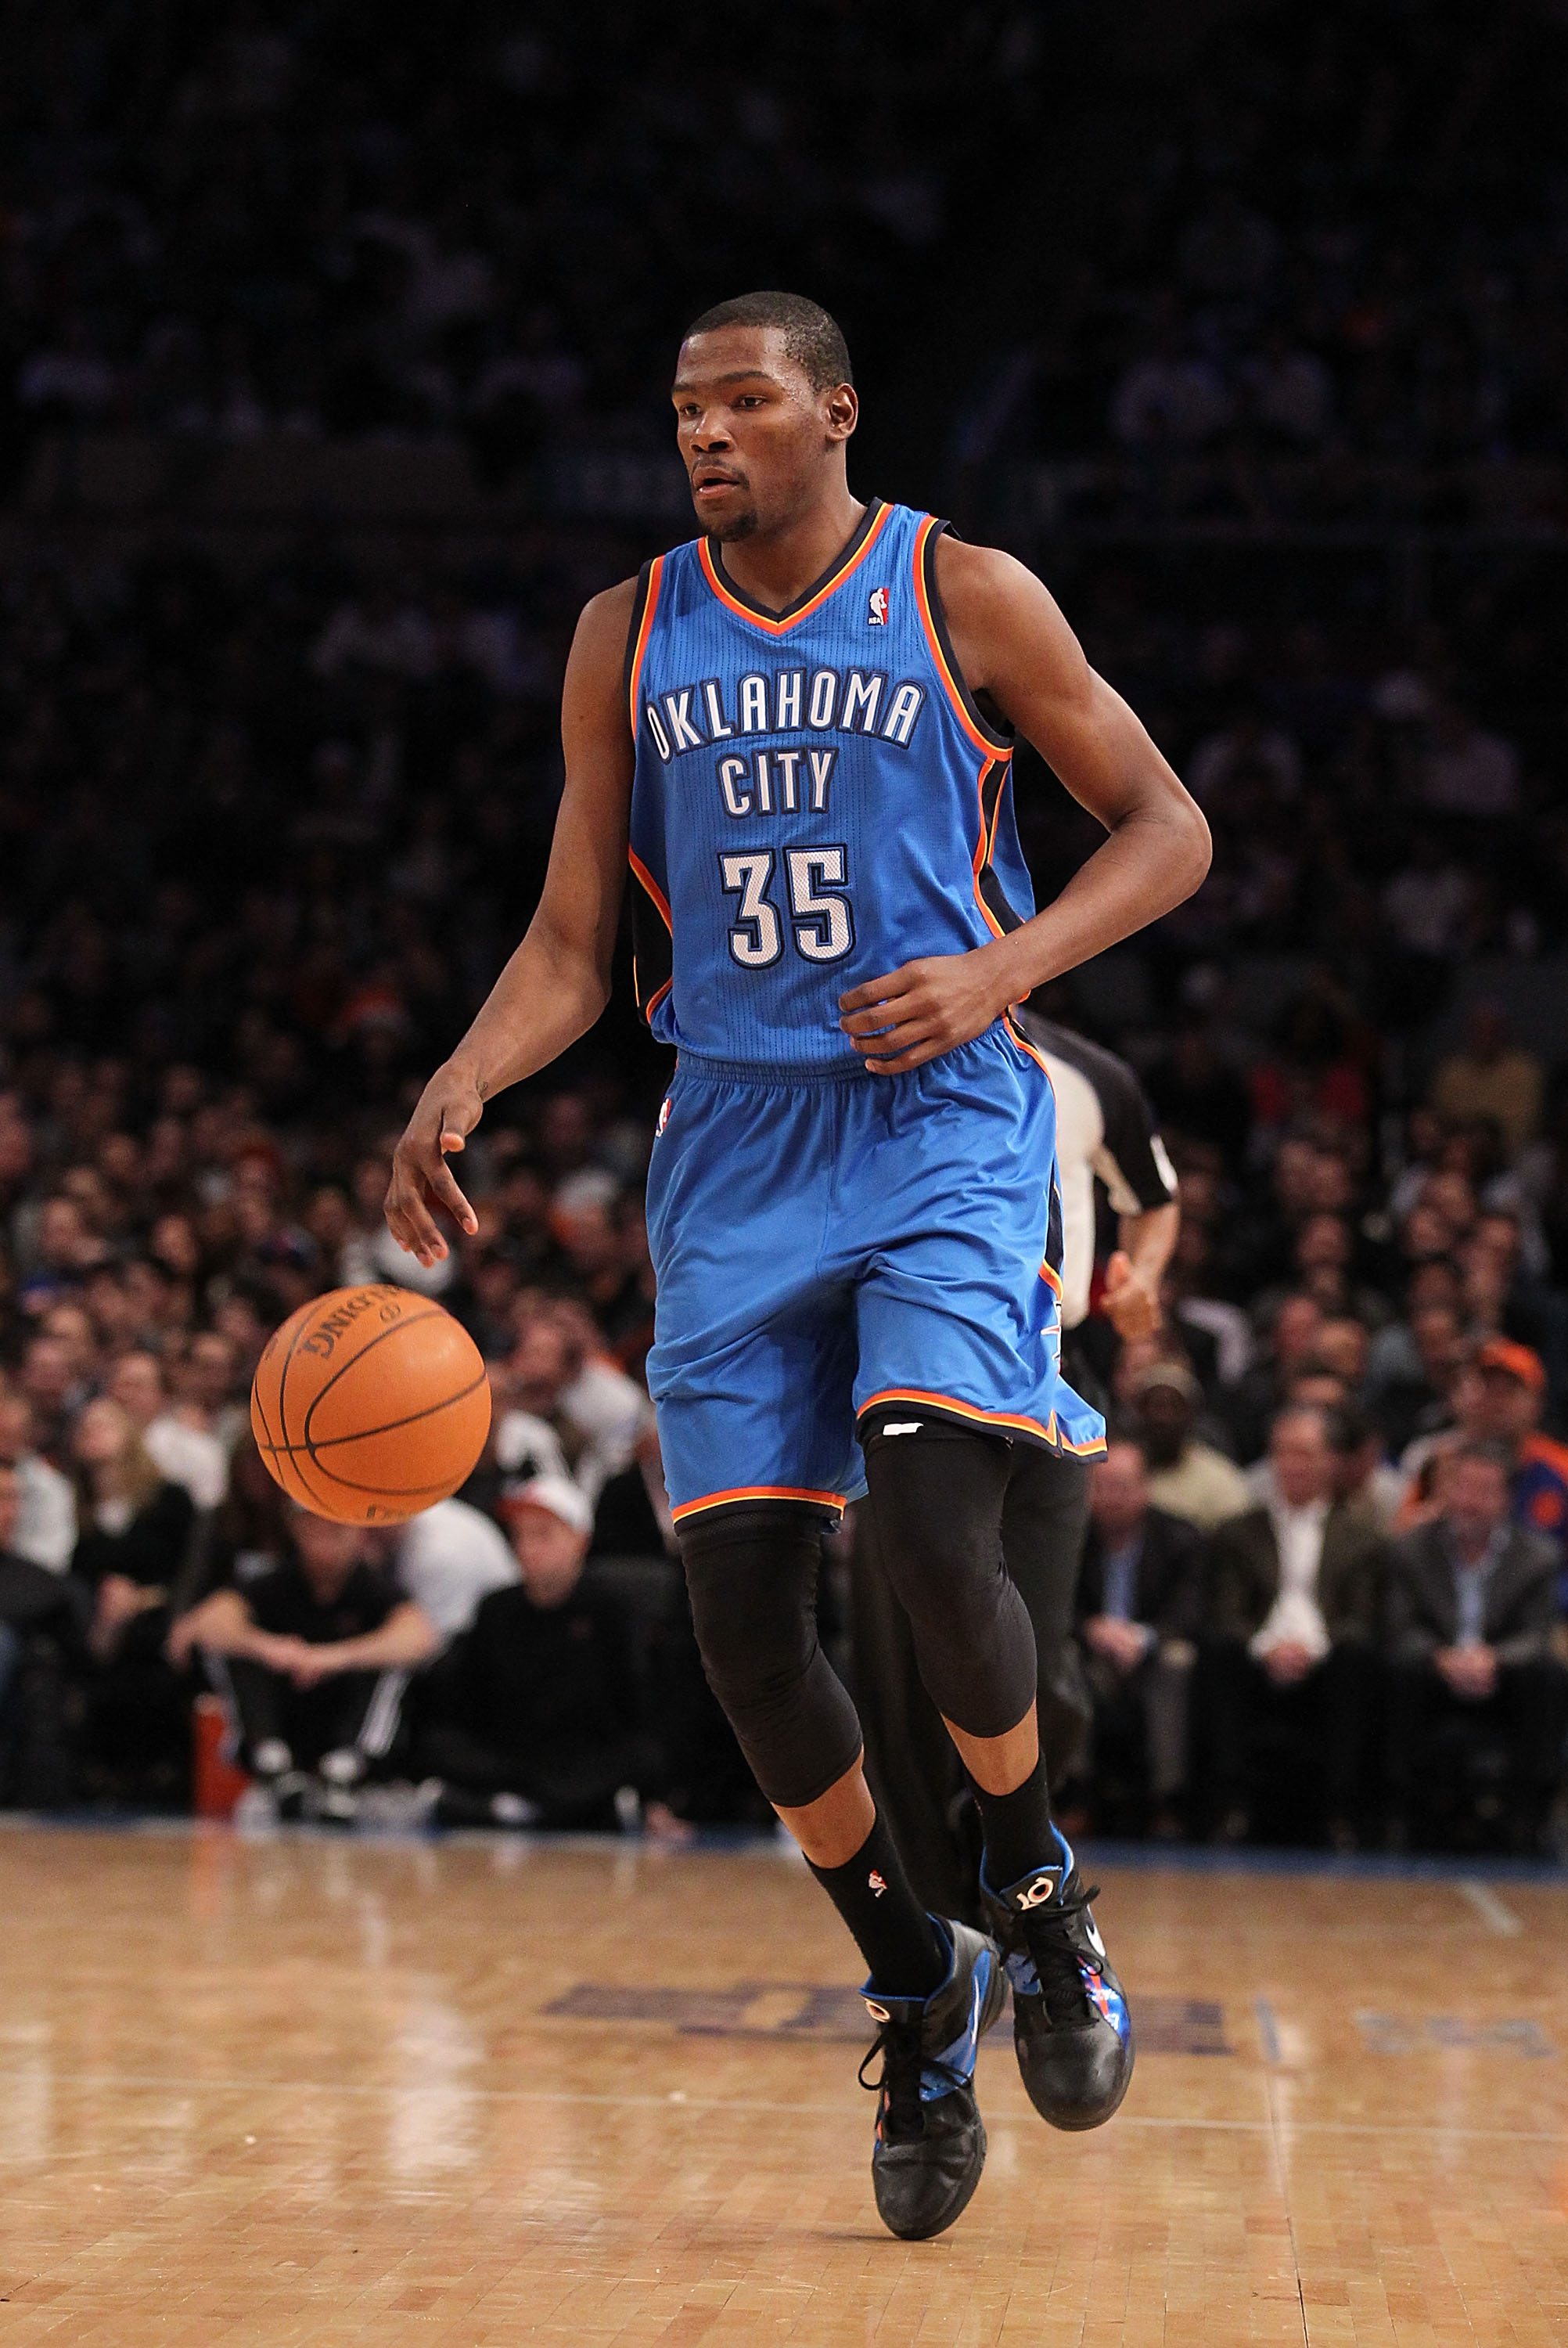 NEW YORK - DECEMBER 22:  Kevin Durant of the Oklahoma City Thunder in action against the New York Knicks at Madison Square Garden on December 22, 2010 in New York, New York.   NOTE TO USER: User expressly acknowledges and agrees that, by downloading and/o